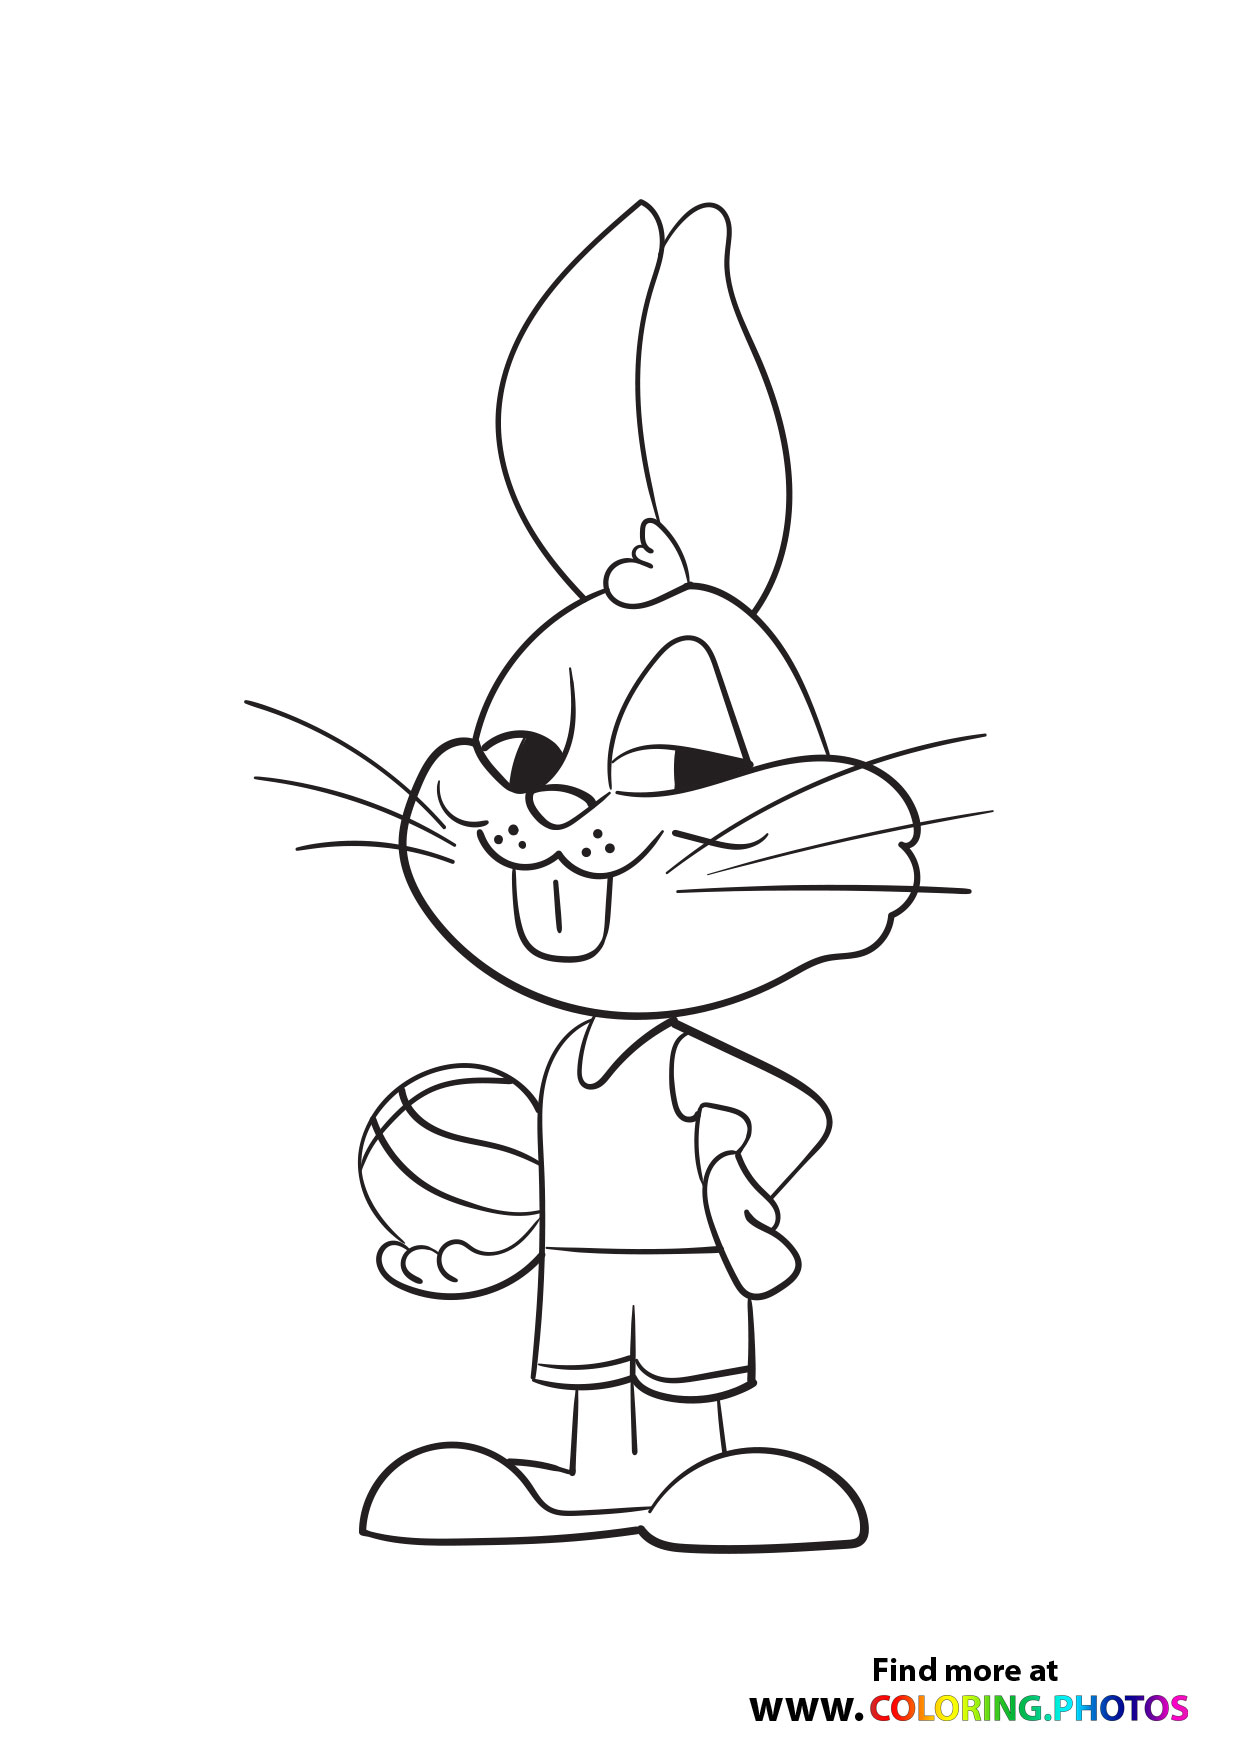 Space Jam A New Legacy Coloring Page Free Printable Coloring Pages My Hot Sex Picture 